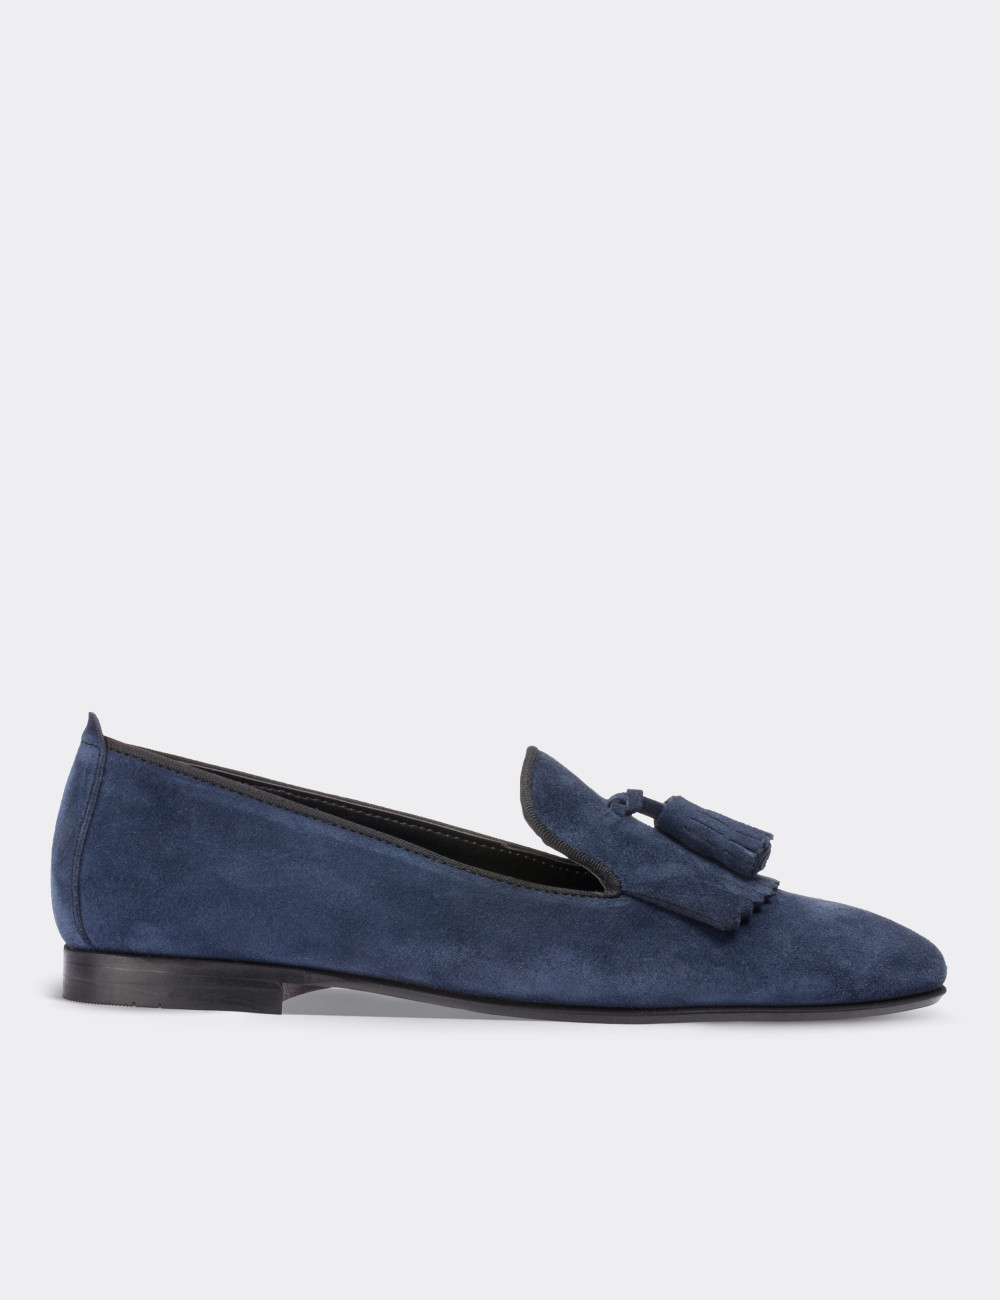 Navy Suede Leather Loafers - 01612ZLCVM01